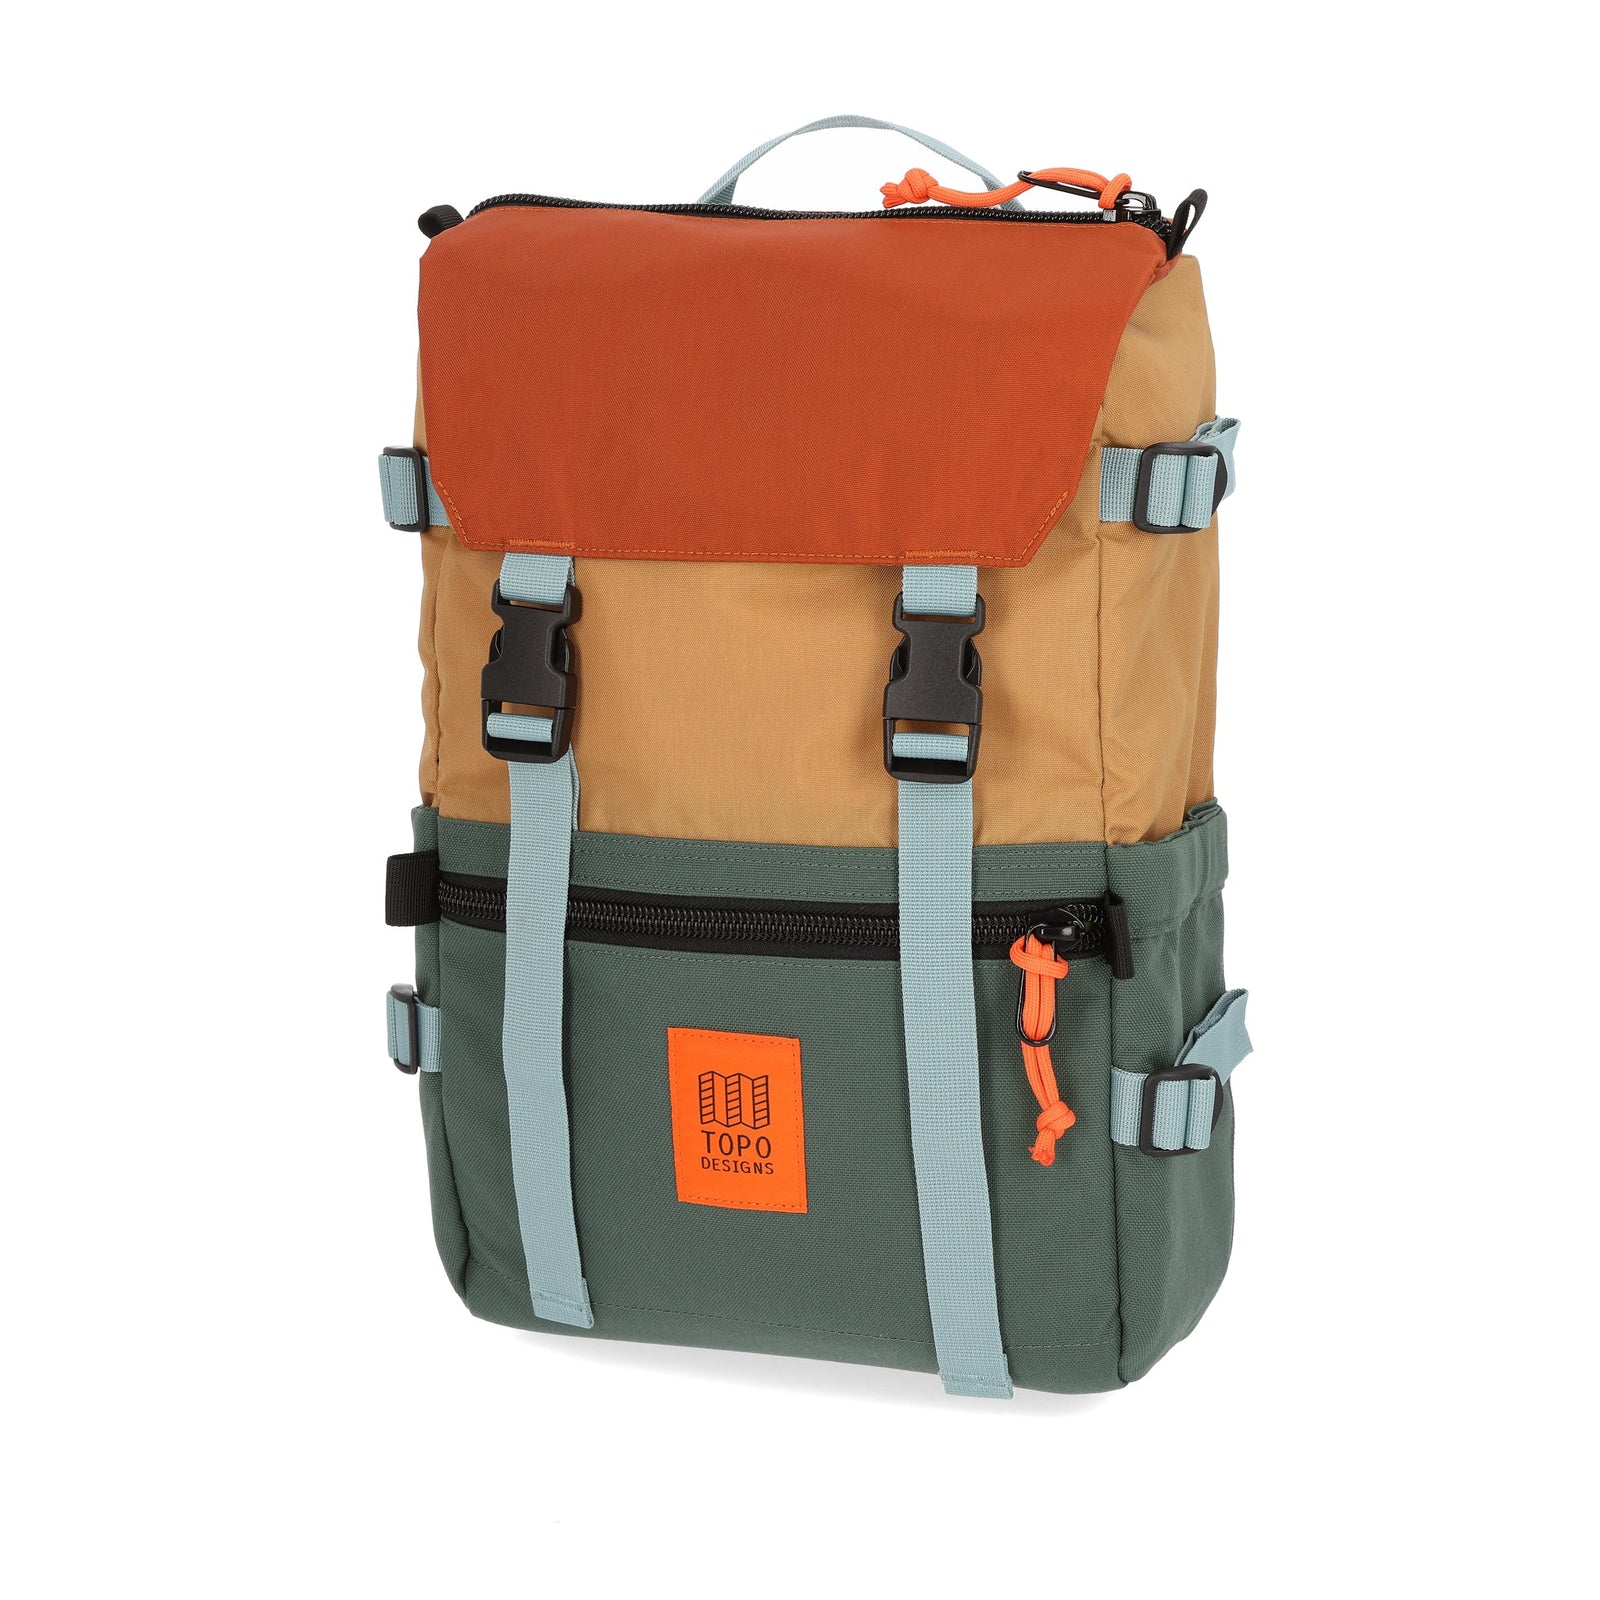 Topo Designs Rover Pack Classic laptop backpack in "Forest / Khaki".